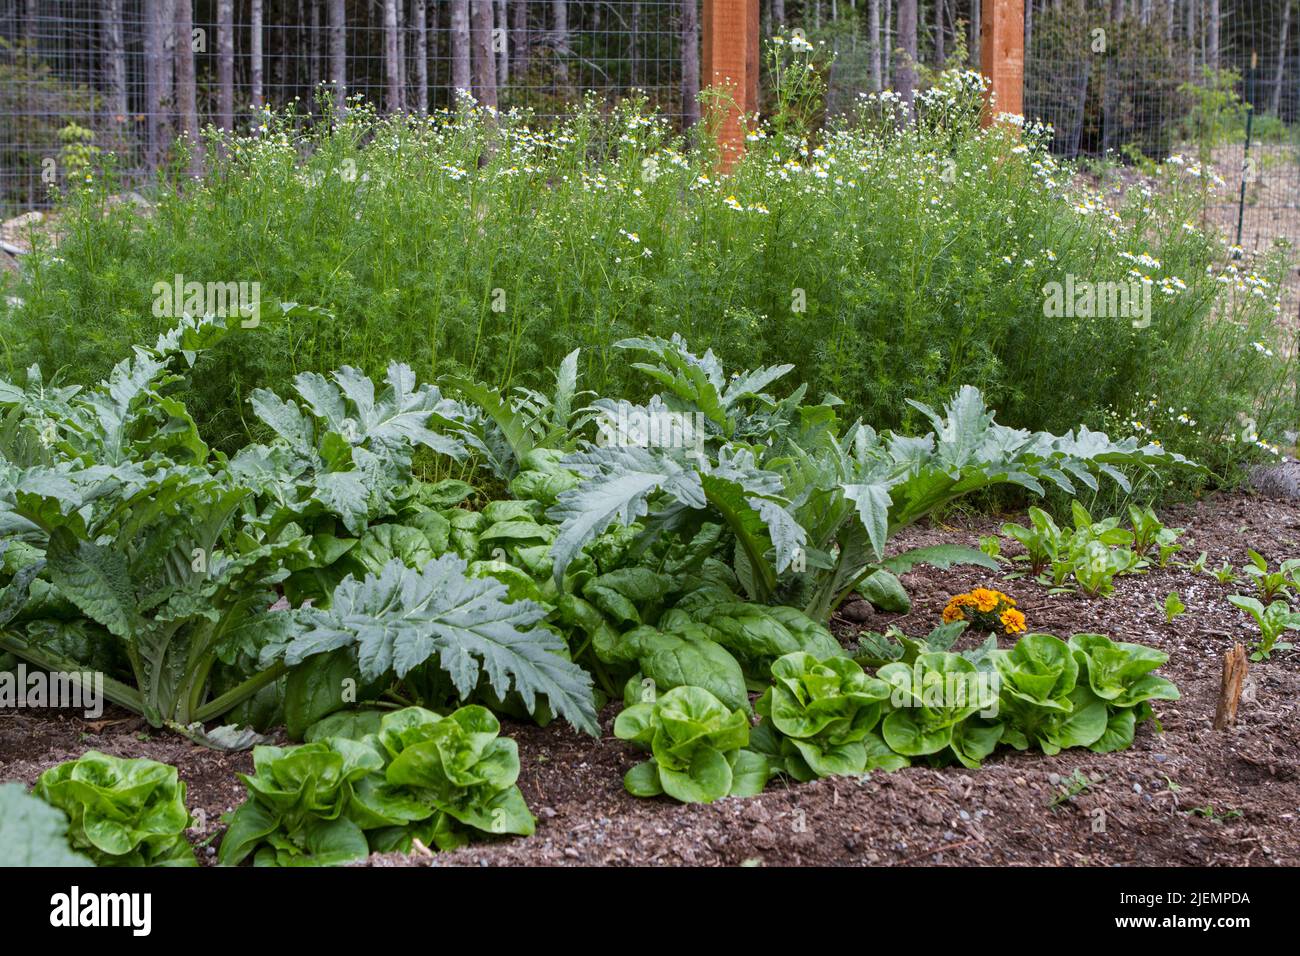 Flourishing spring vegetable and flower garden in Pacific Northwest, United States. Stock Photo